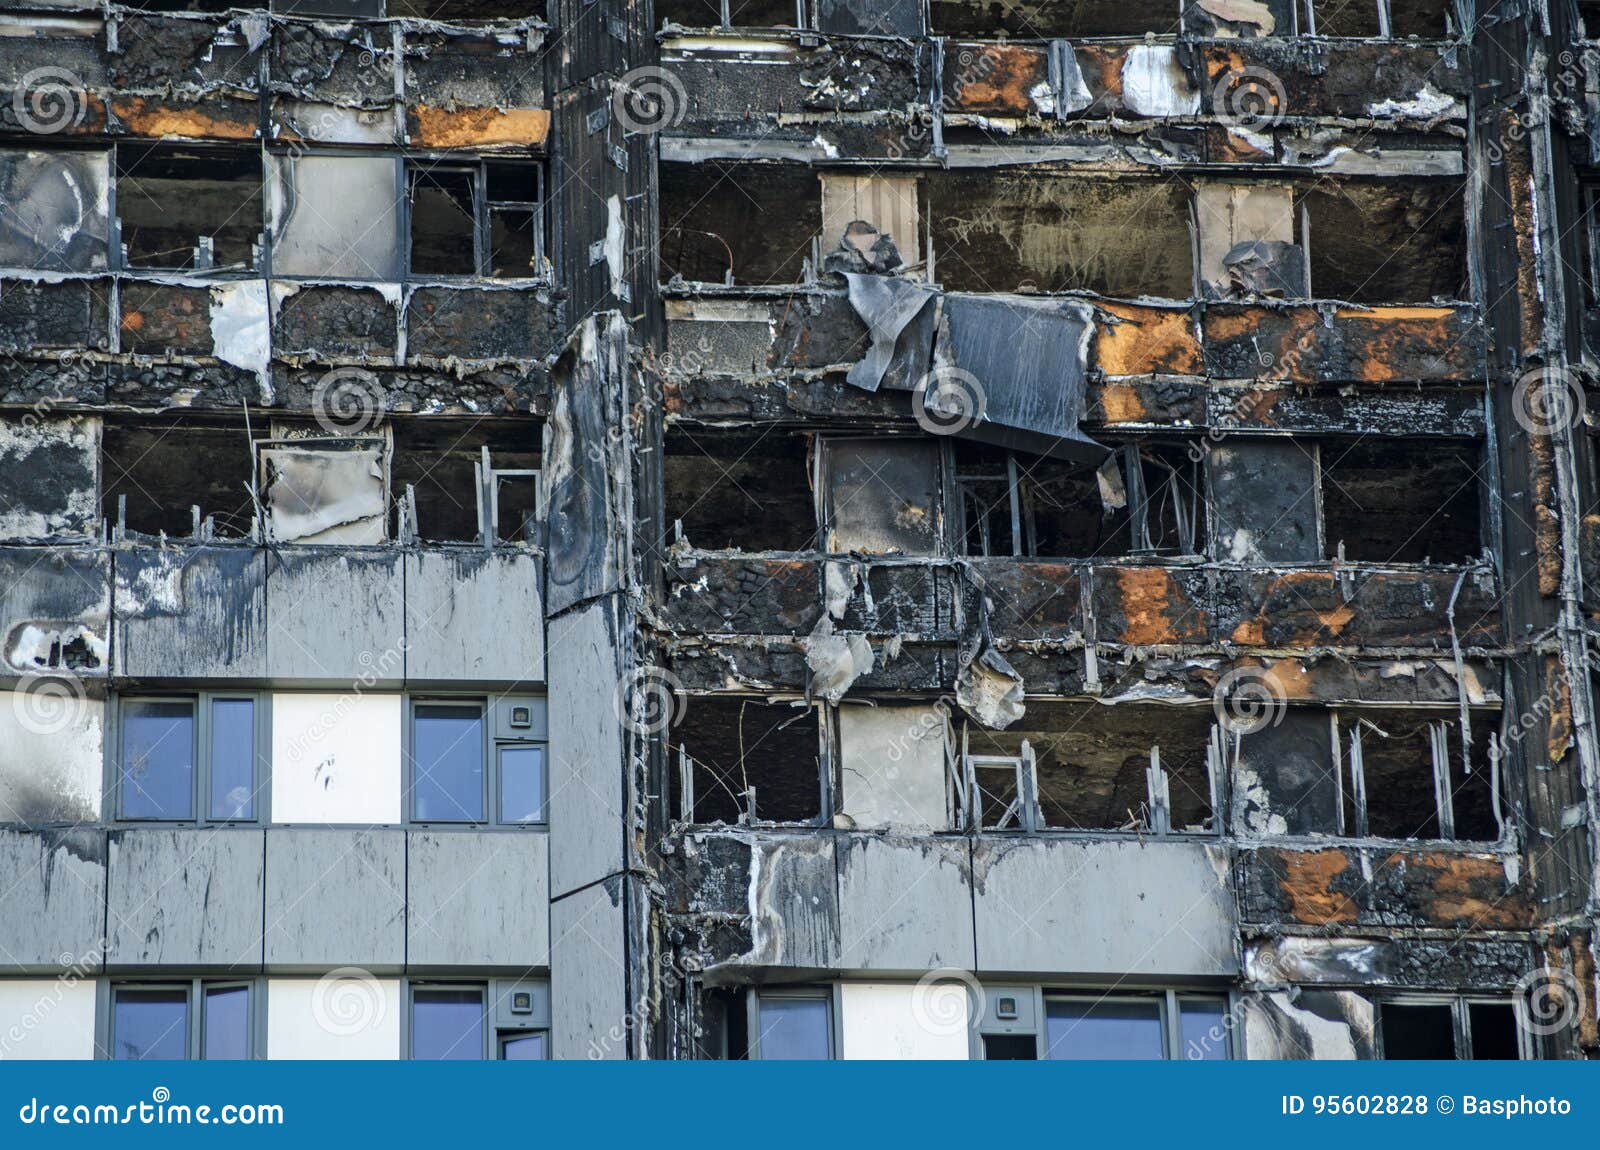 grenfell tower close up